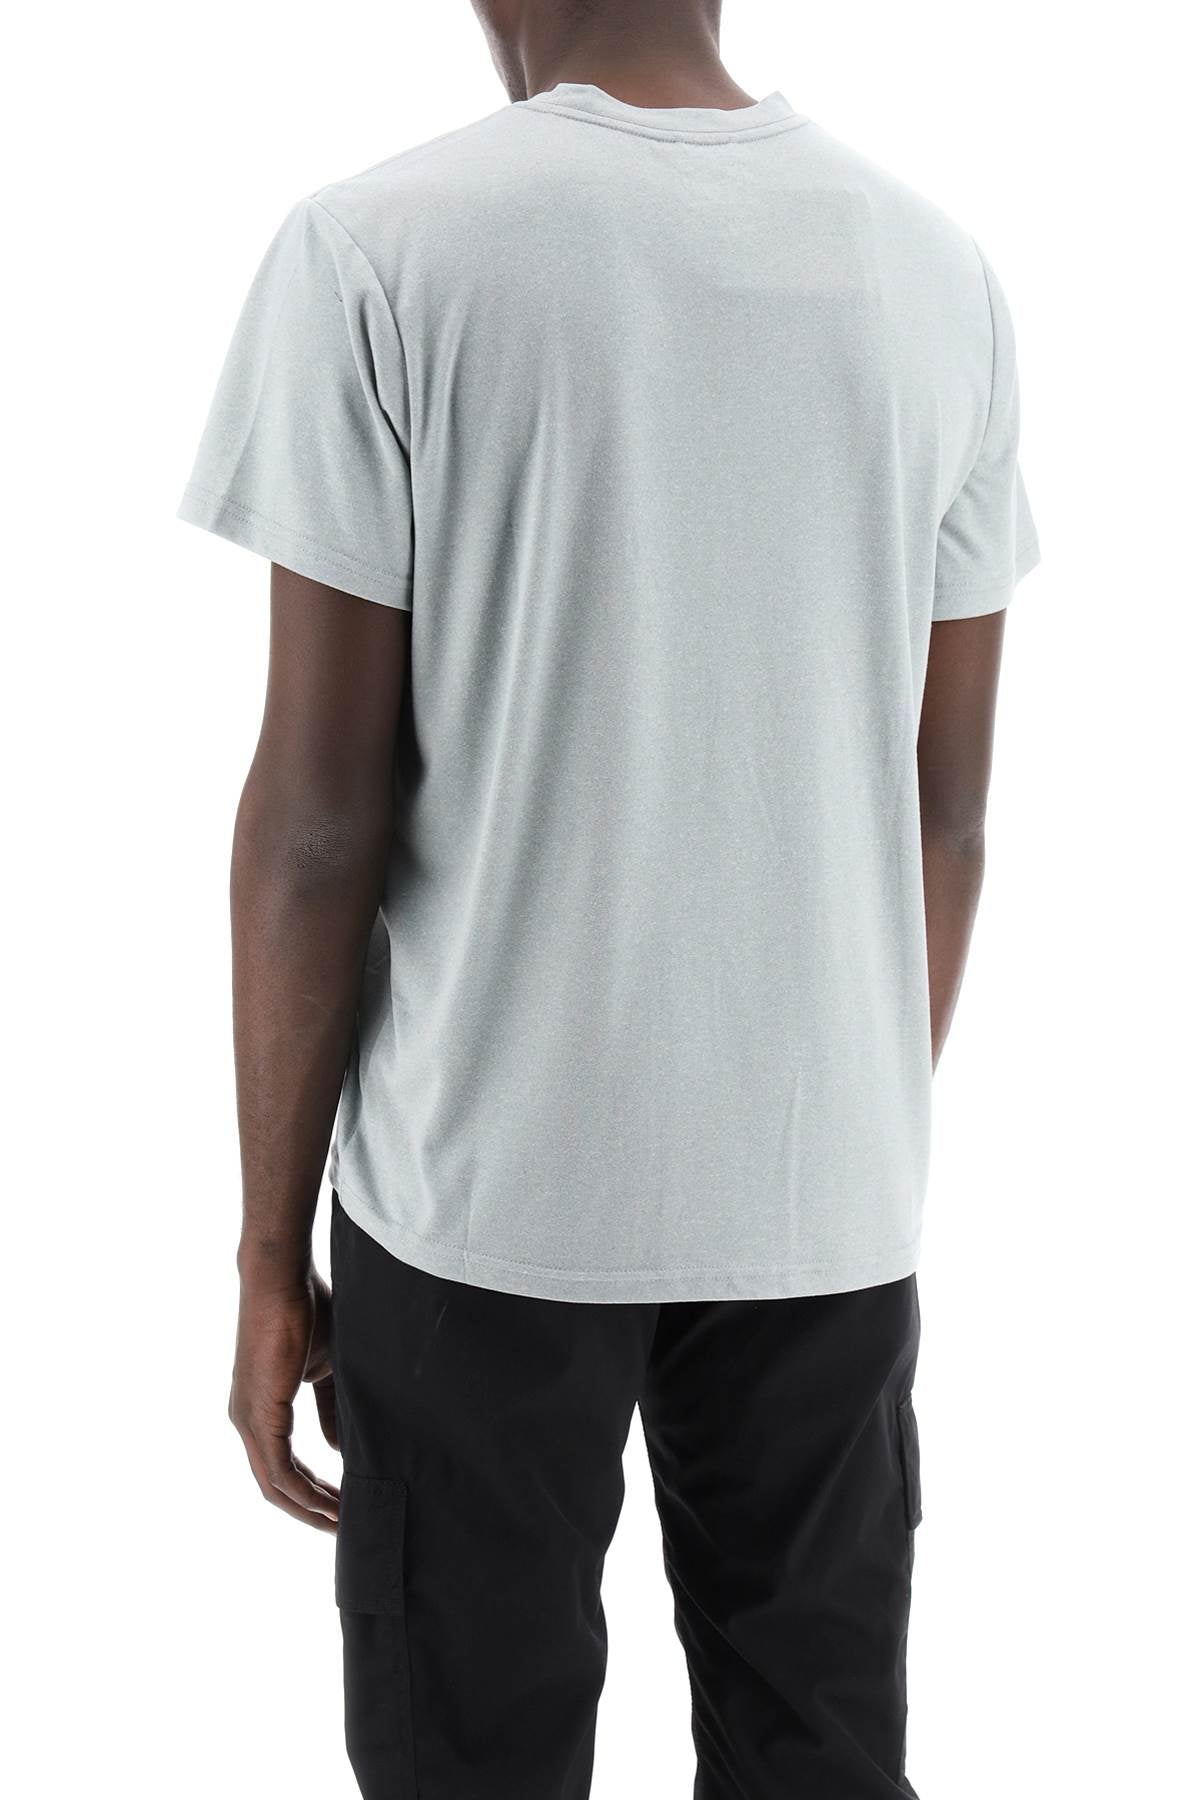 The north face reaxion t-2